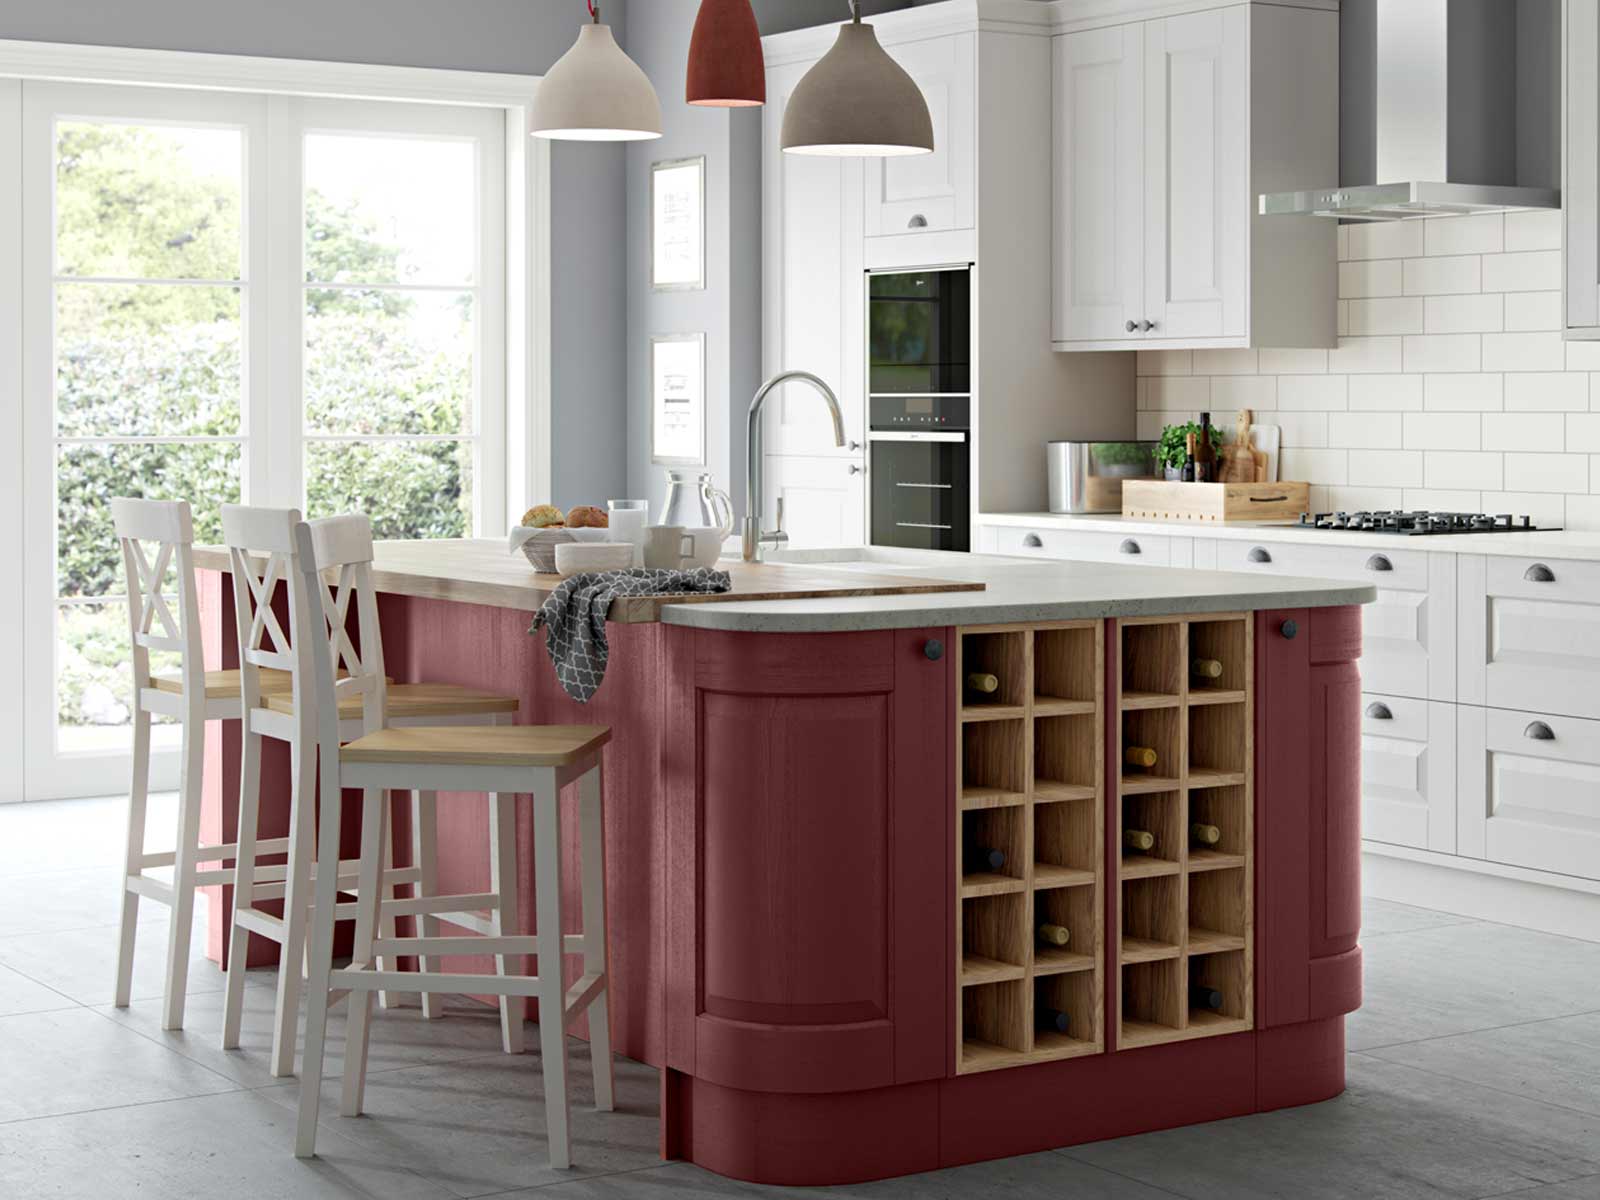 A perfect kitchen with rounded doors and wine pigeon holes in a kitchen island